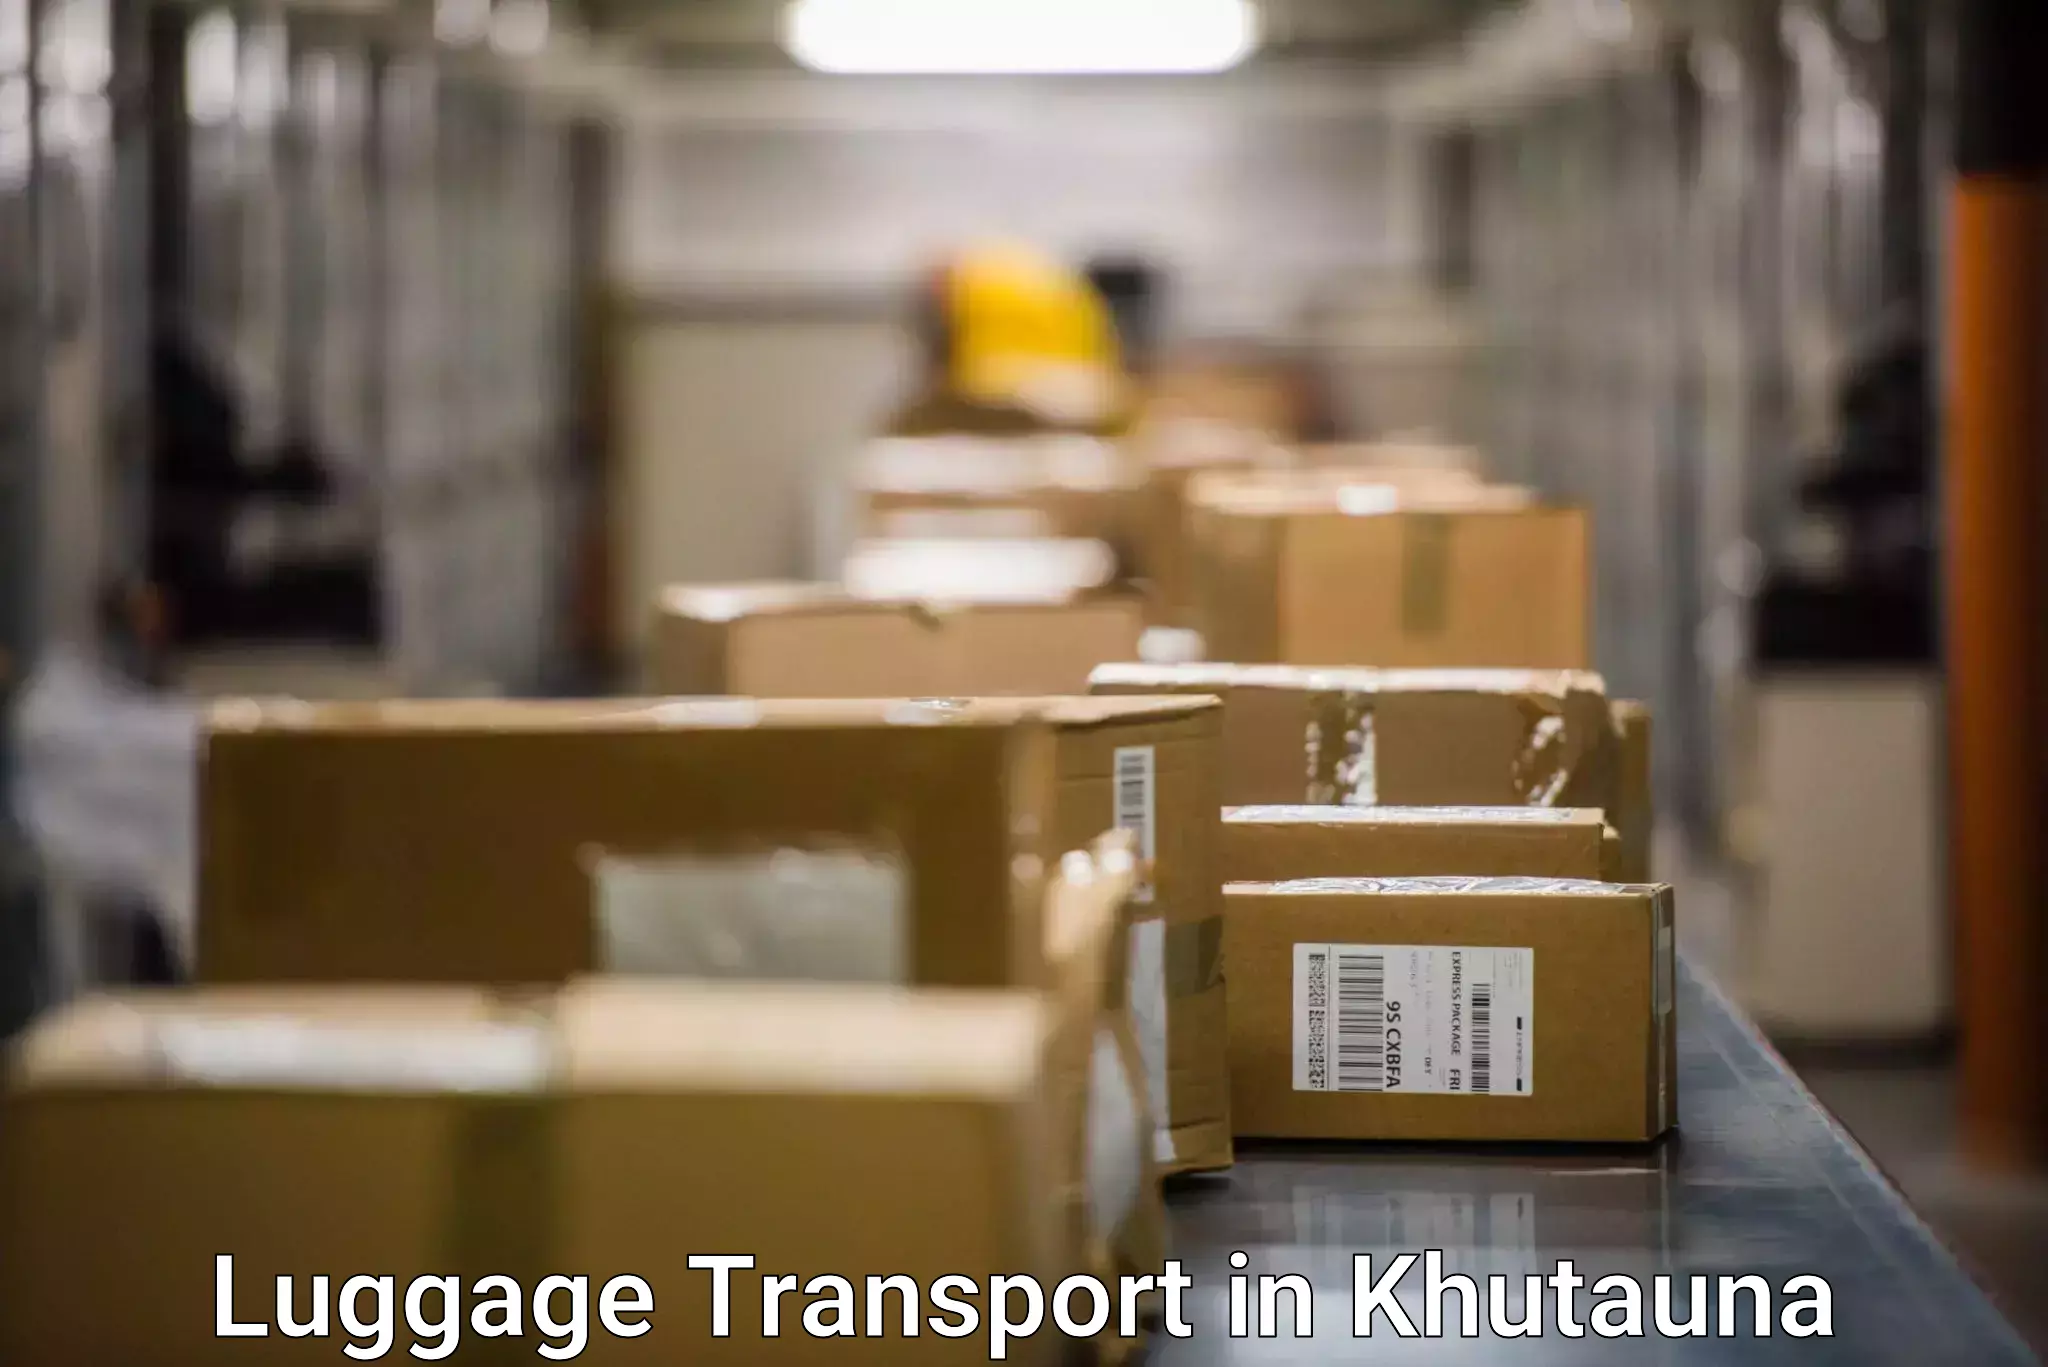 Luggage shipping options in Khutauna